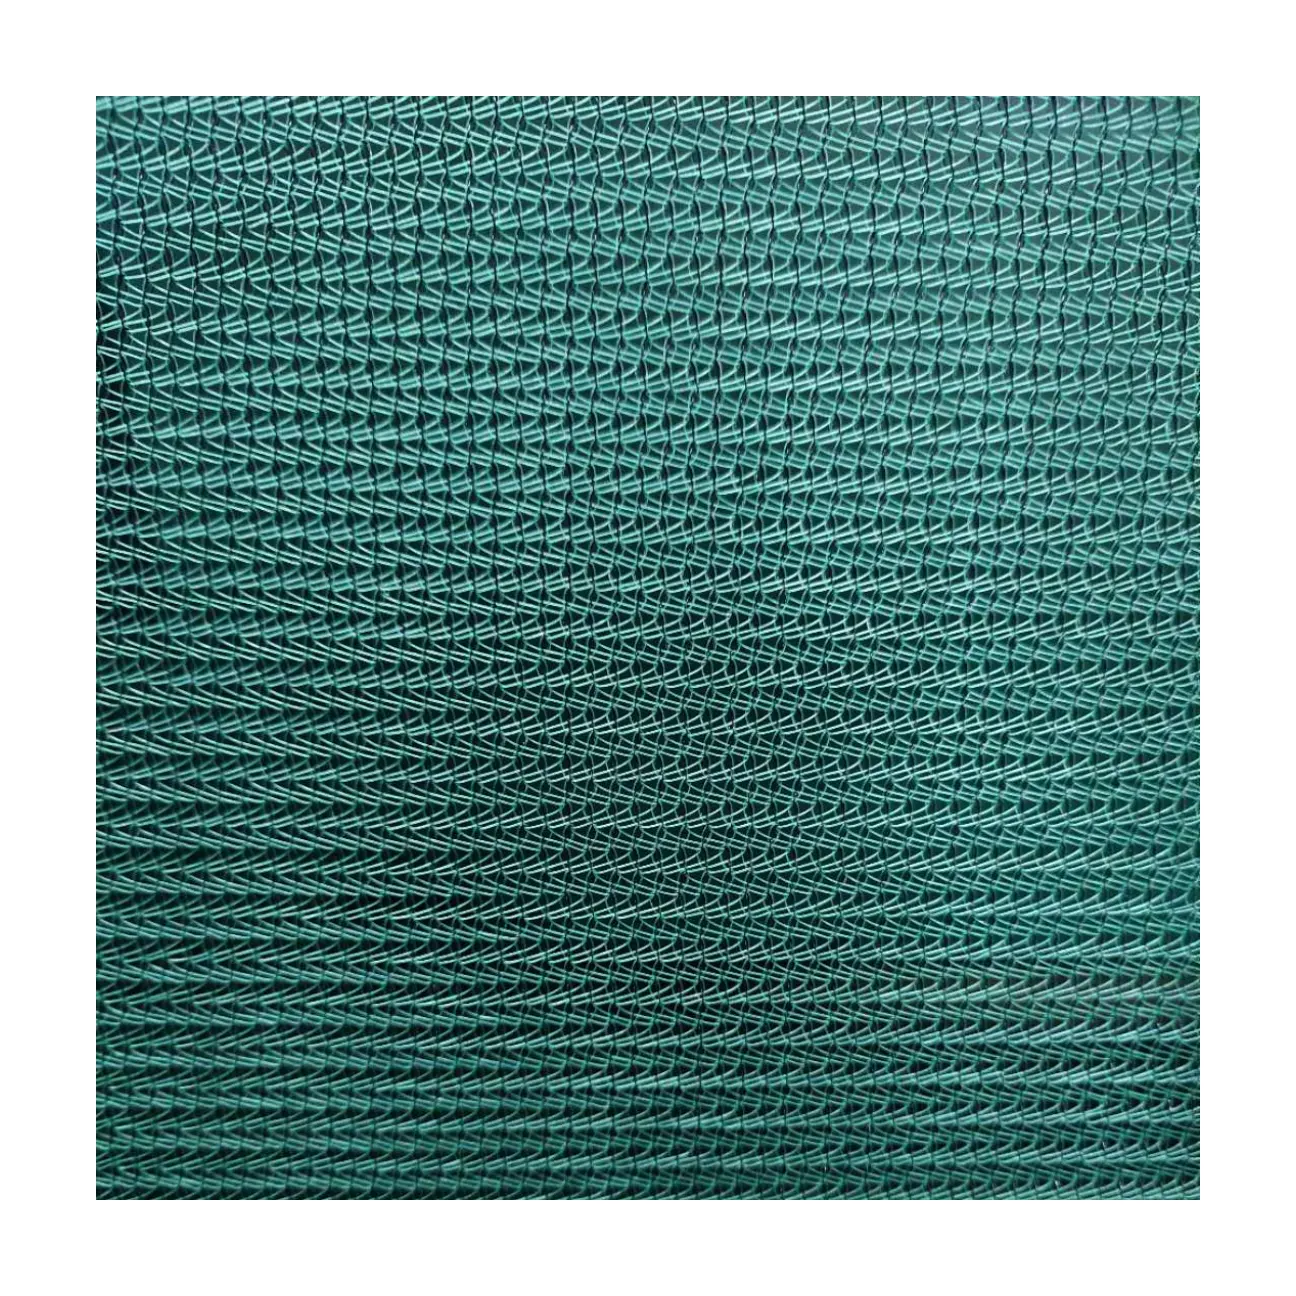 Fence Mesh Windscreen Privacy Netting for Outdoor